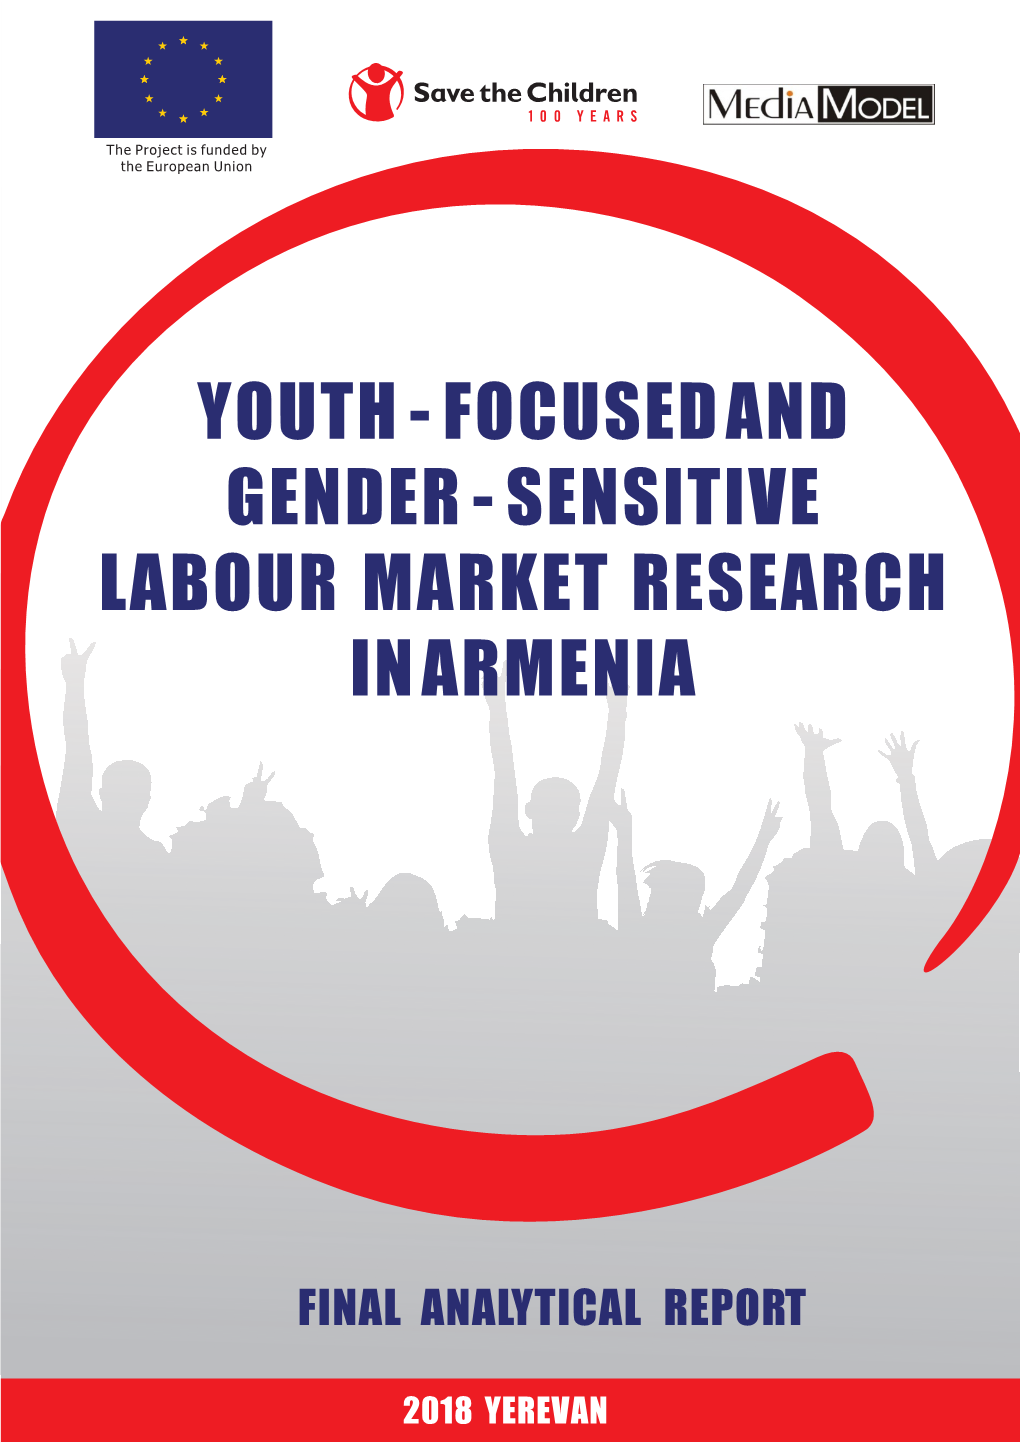 Youth - Focused and Gender - Sensitive Labour Market Research in Armenia